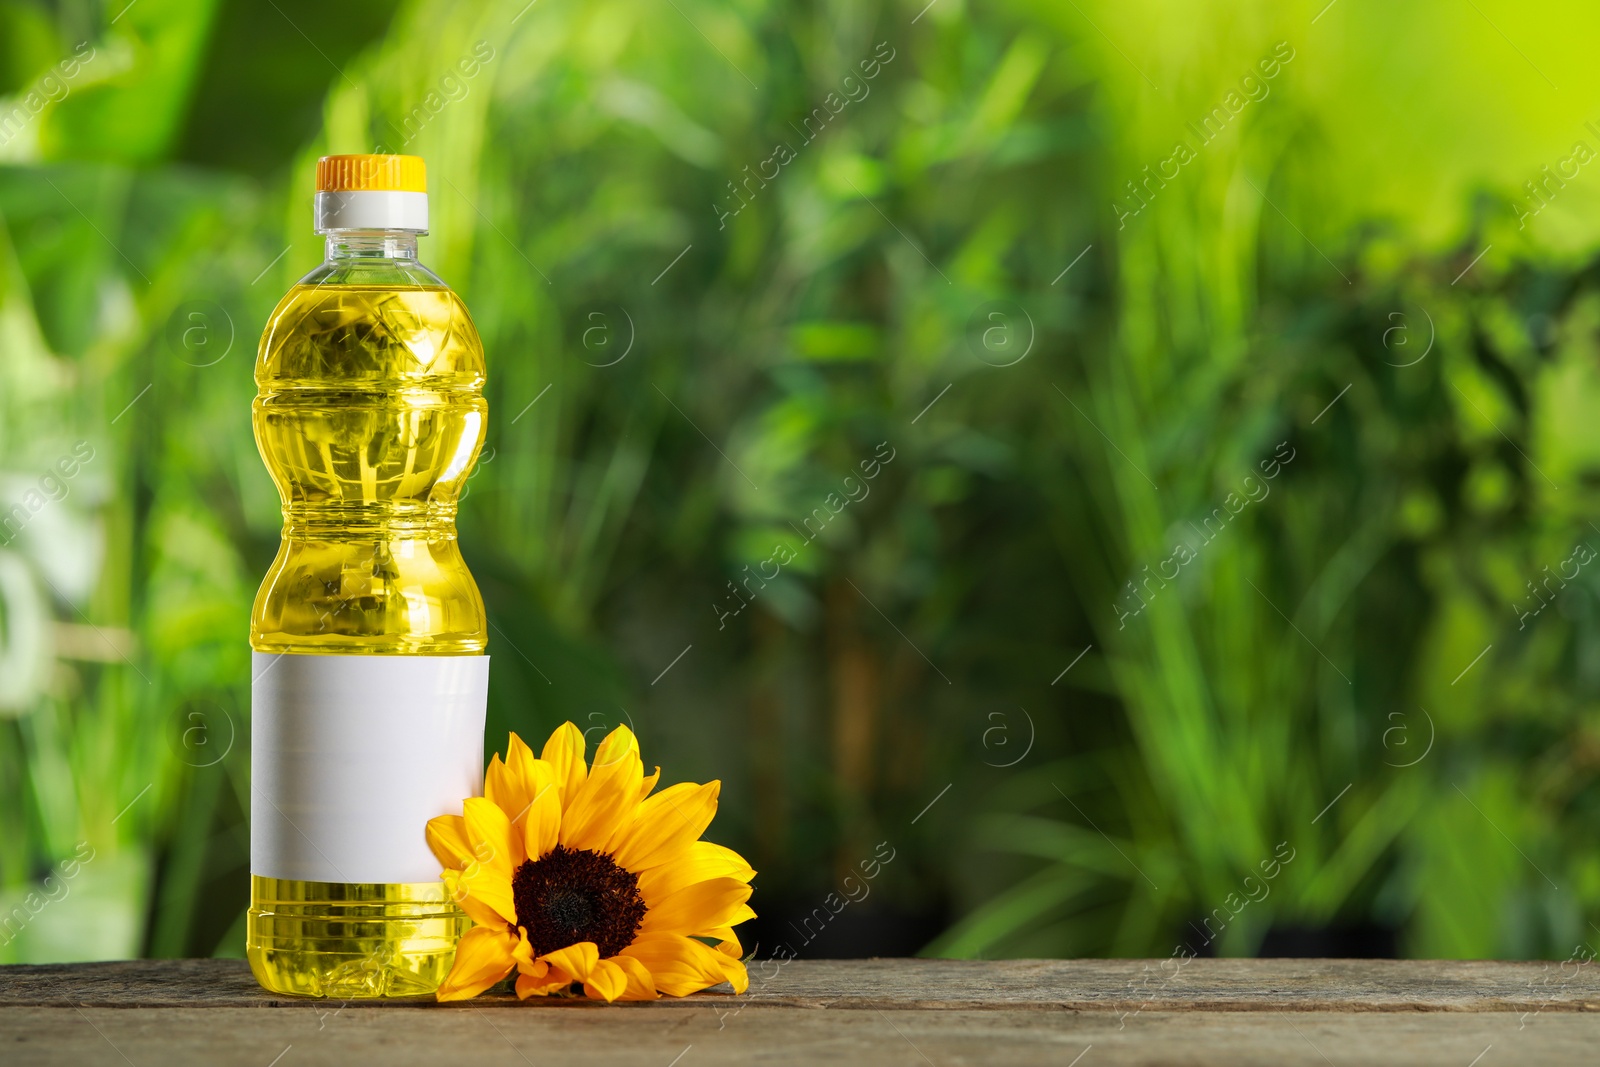 Photo of Bottle of cooking oil and sunflower on wooden table against blurred background, space for text